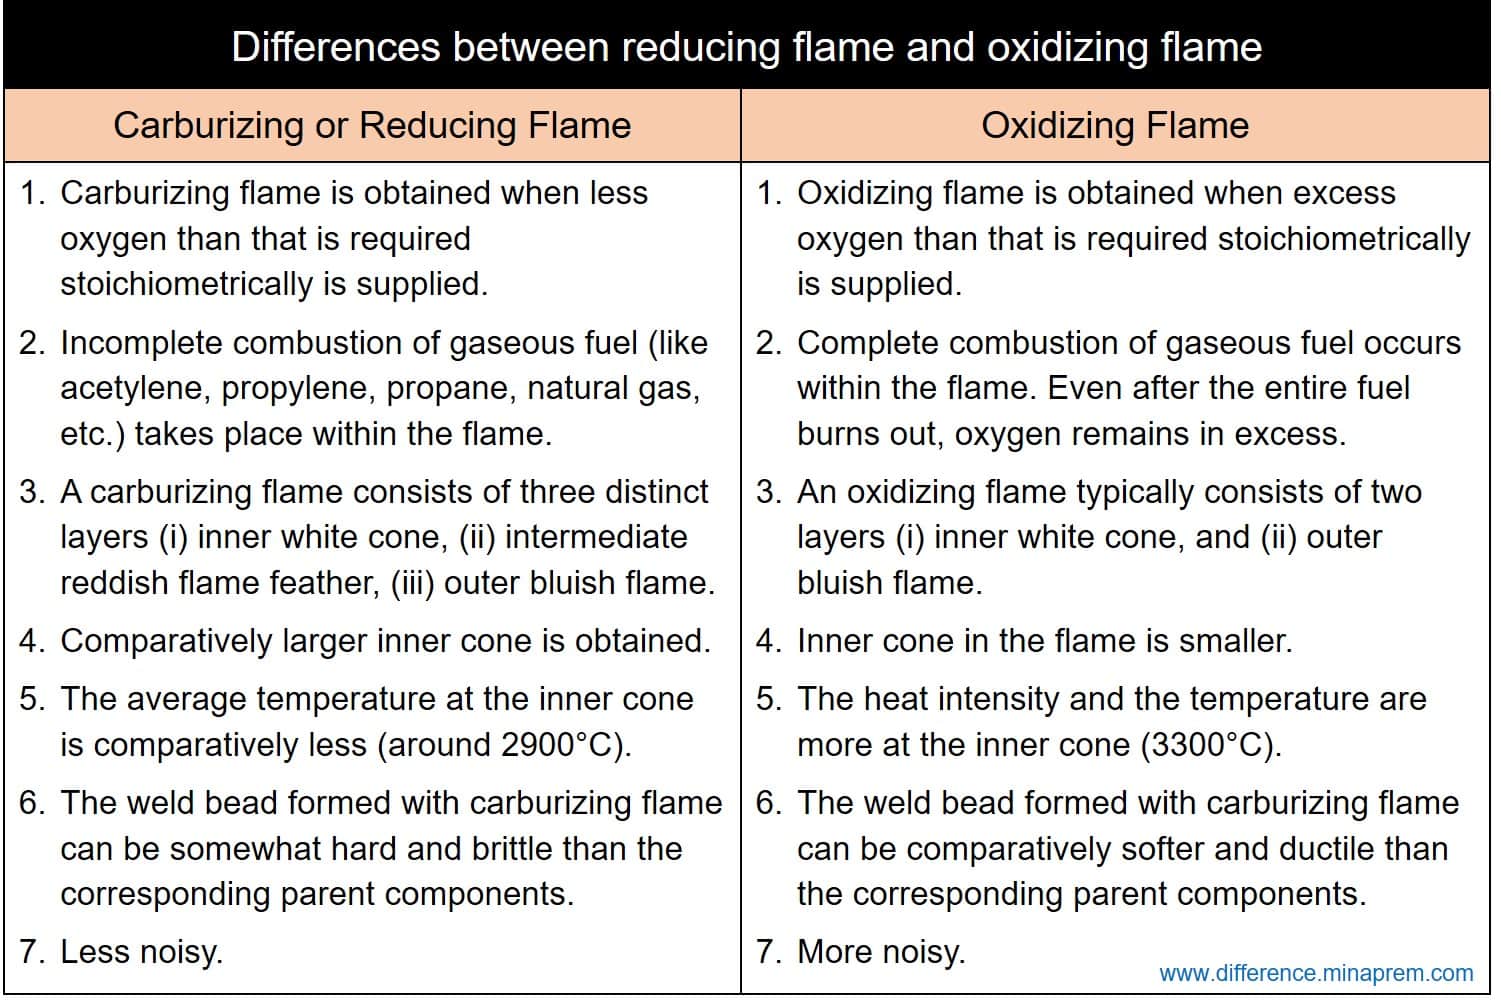 Difference between reducing flame and oxidizing flame